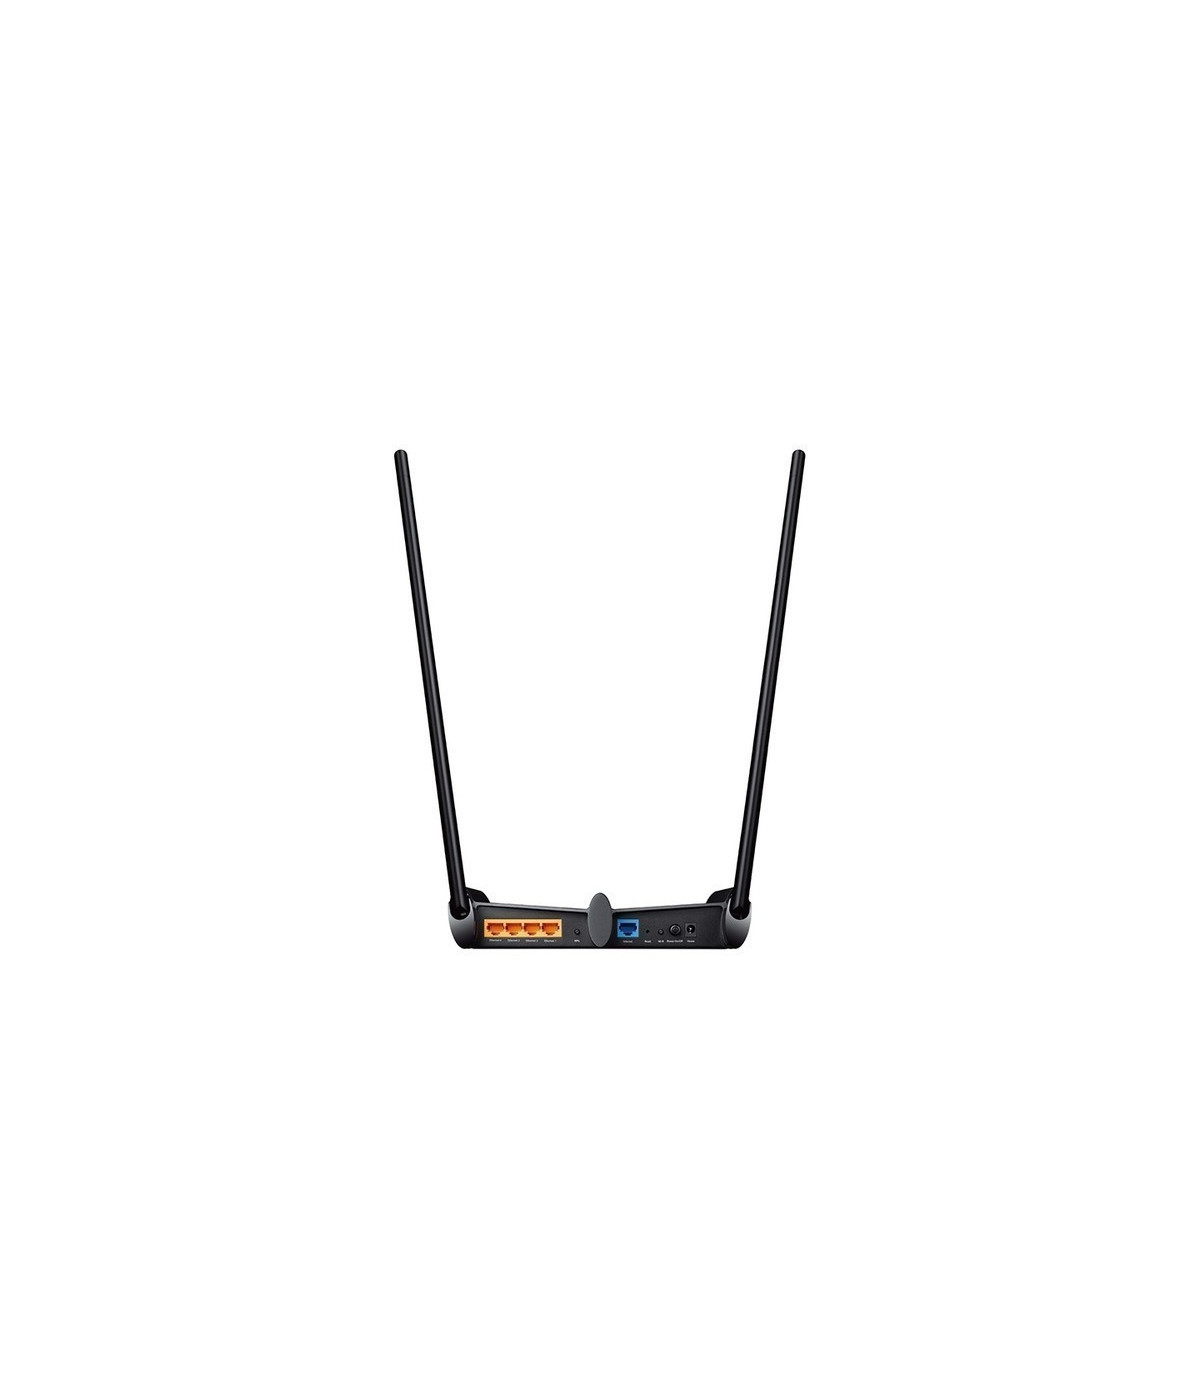 Router Inalambrico Alta Potencia Tp-link TL-WR841HP 300mbps 2